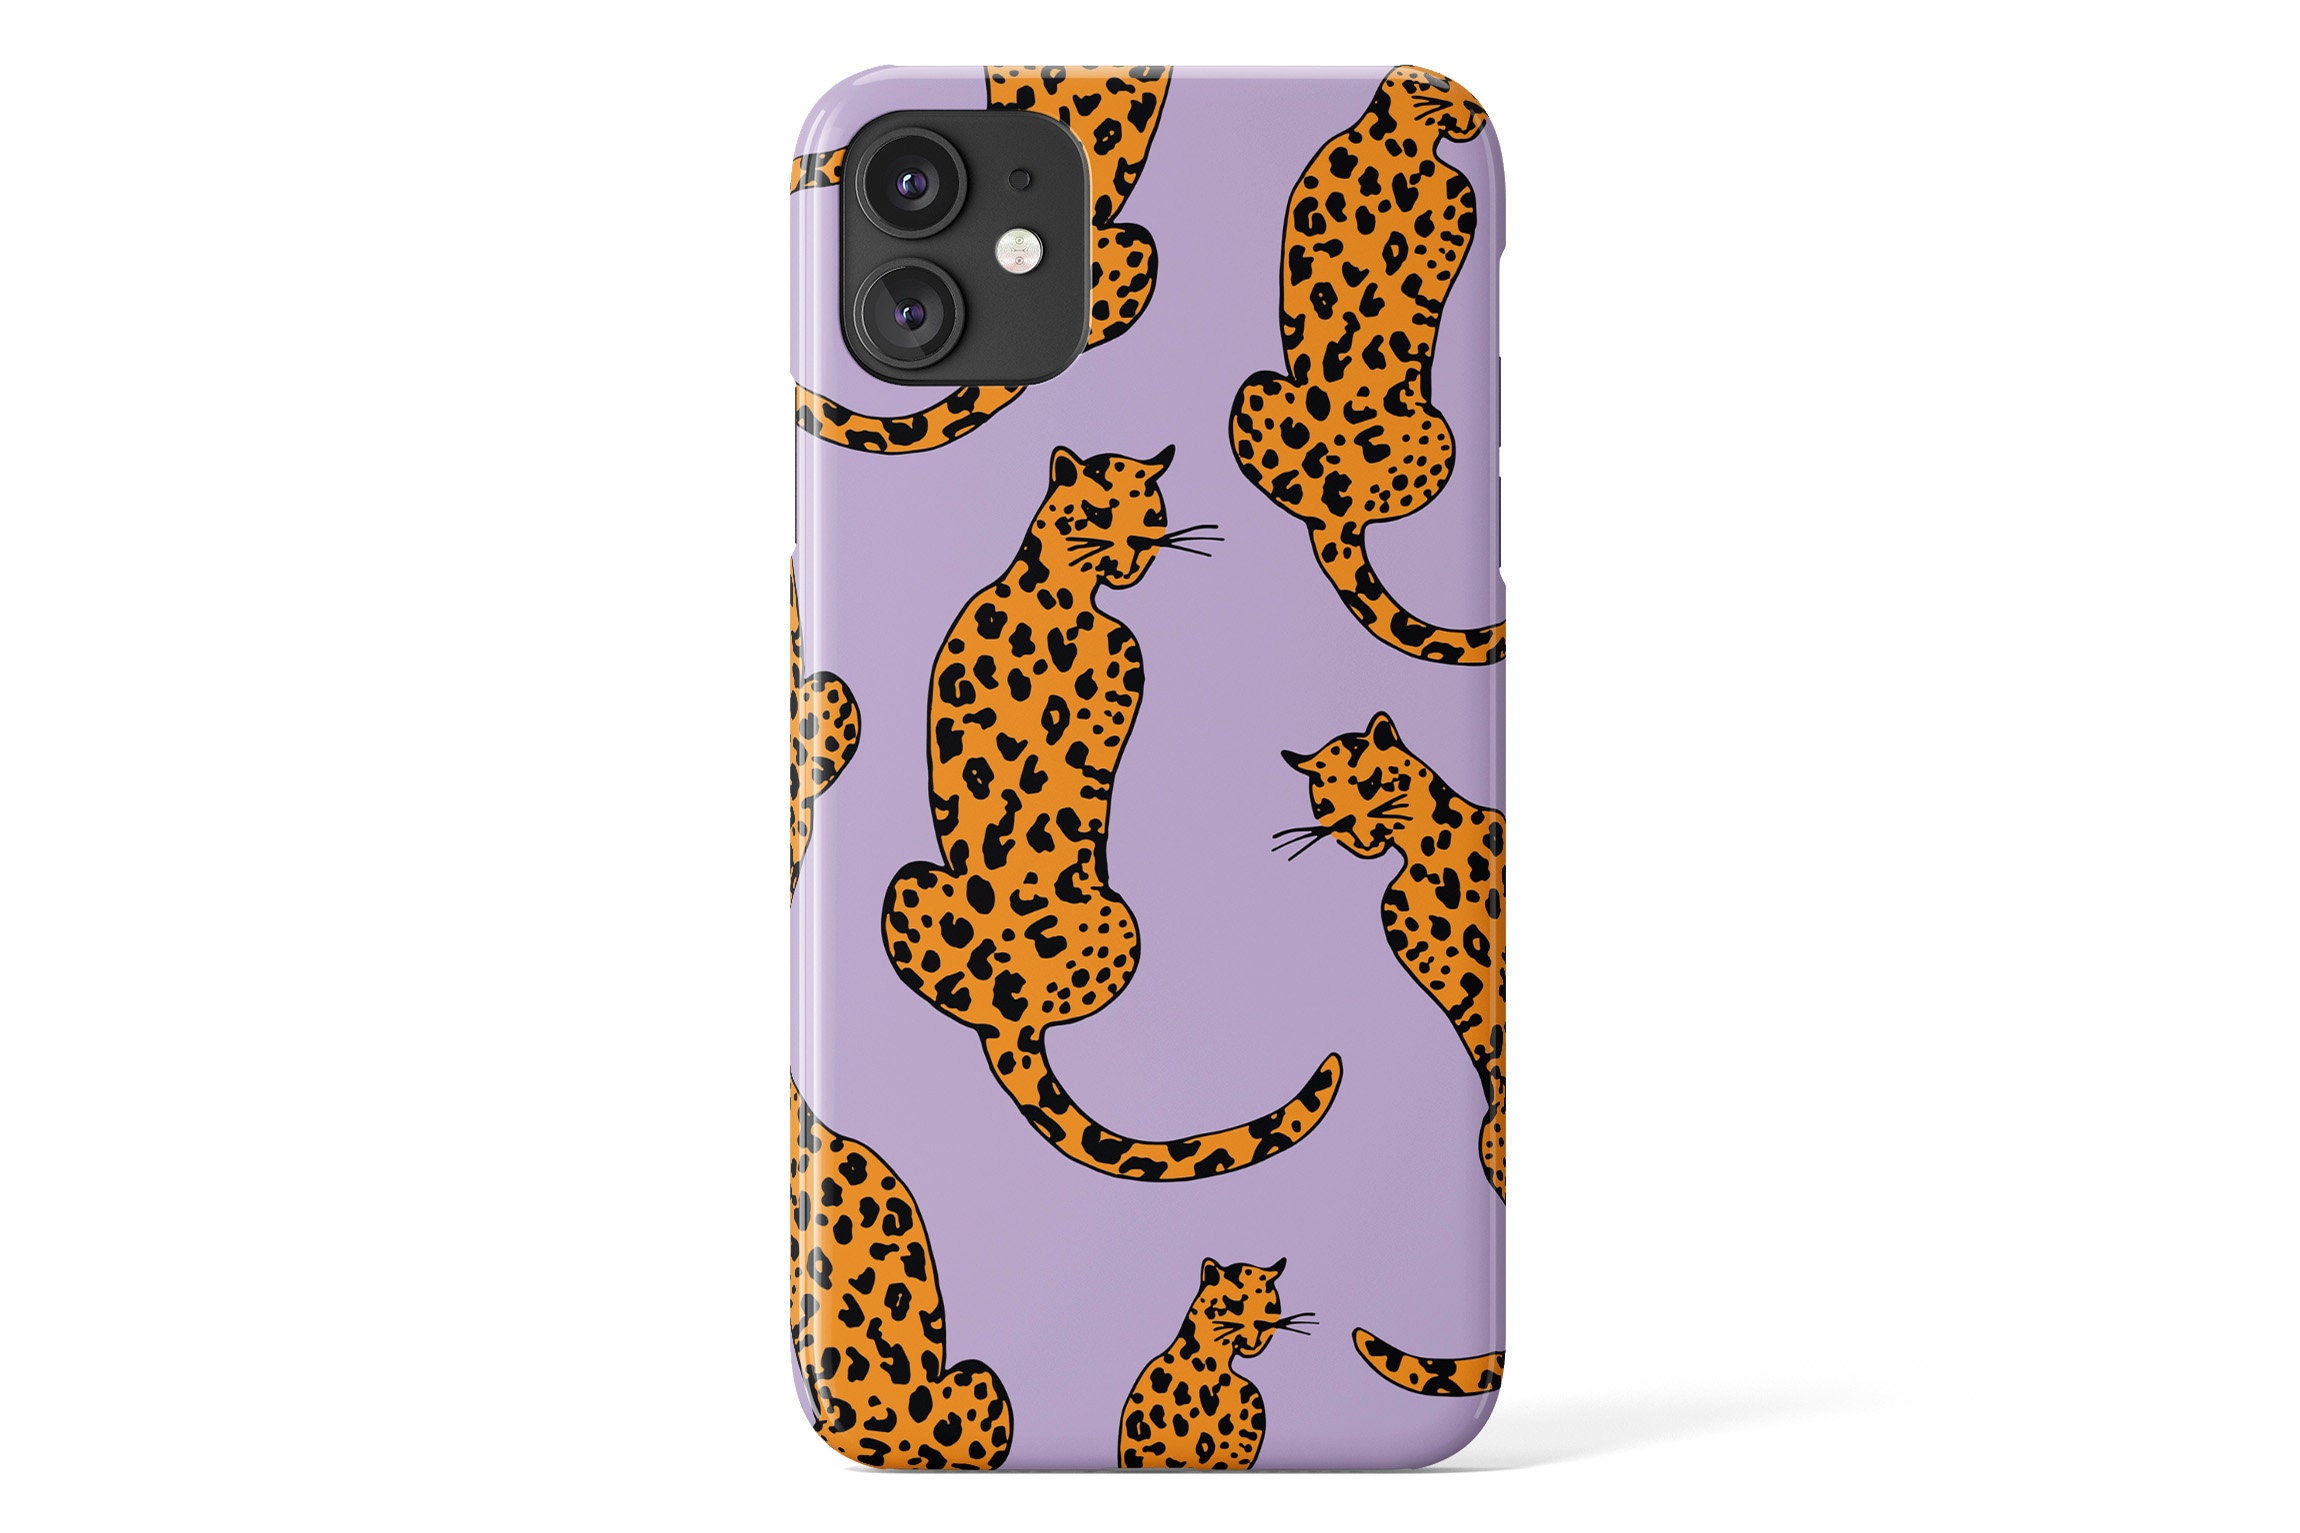 Fashion Colorful Leopard Print Phone Case for iPhone Xs Max XR X Case for iPhone 6 6s 7 8 Plus Back Cover Luxury Soft Cases Cases,Pink,for iPhoneXR 